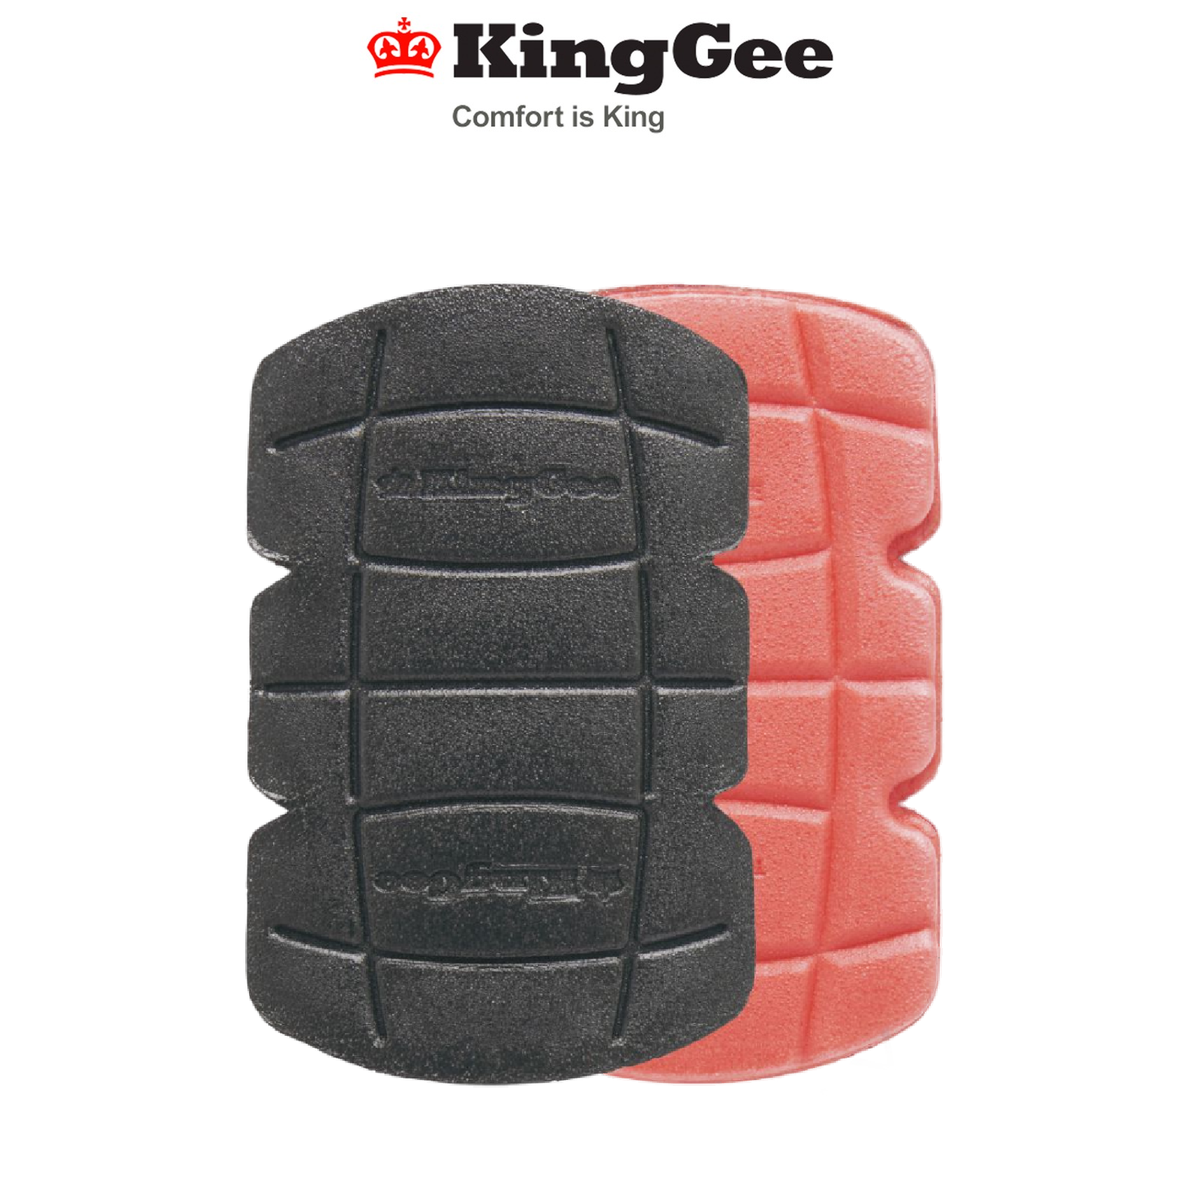 KingGee Knee Pad Work Safety Protection Full Knee Comfortable Lightweight K09005